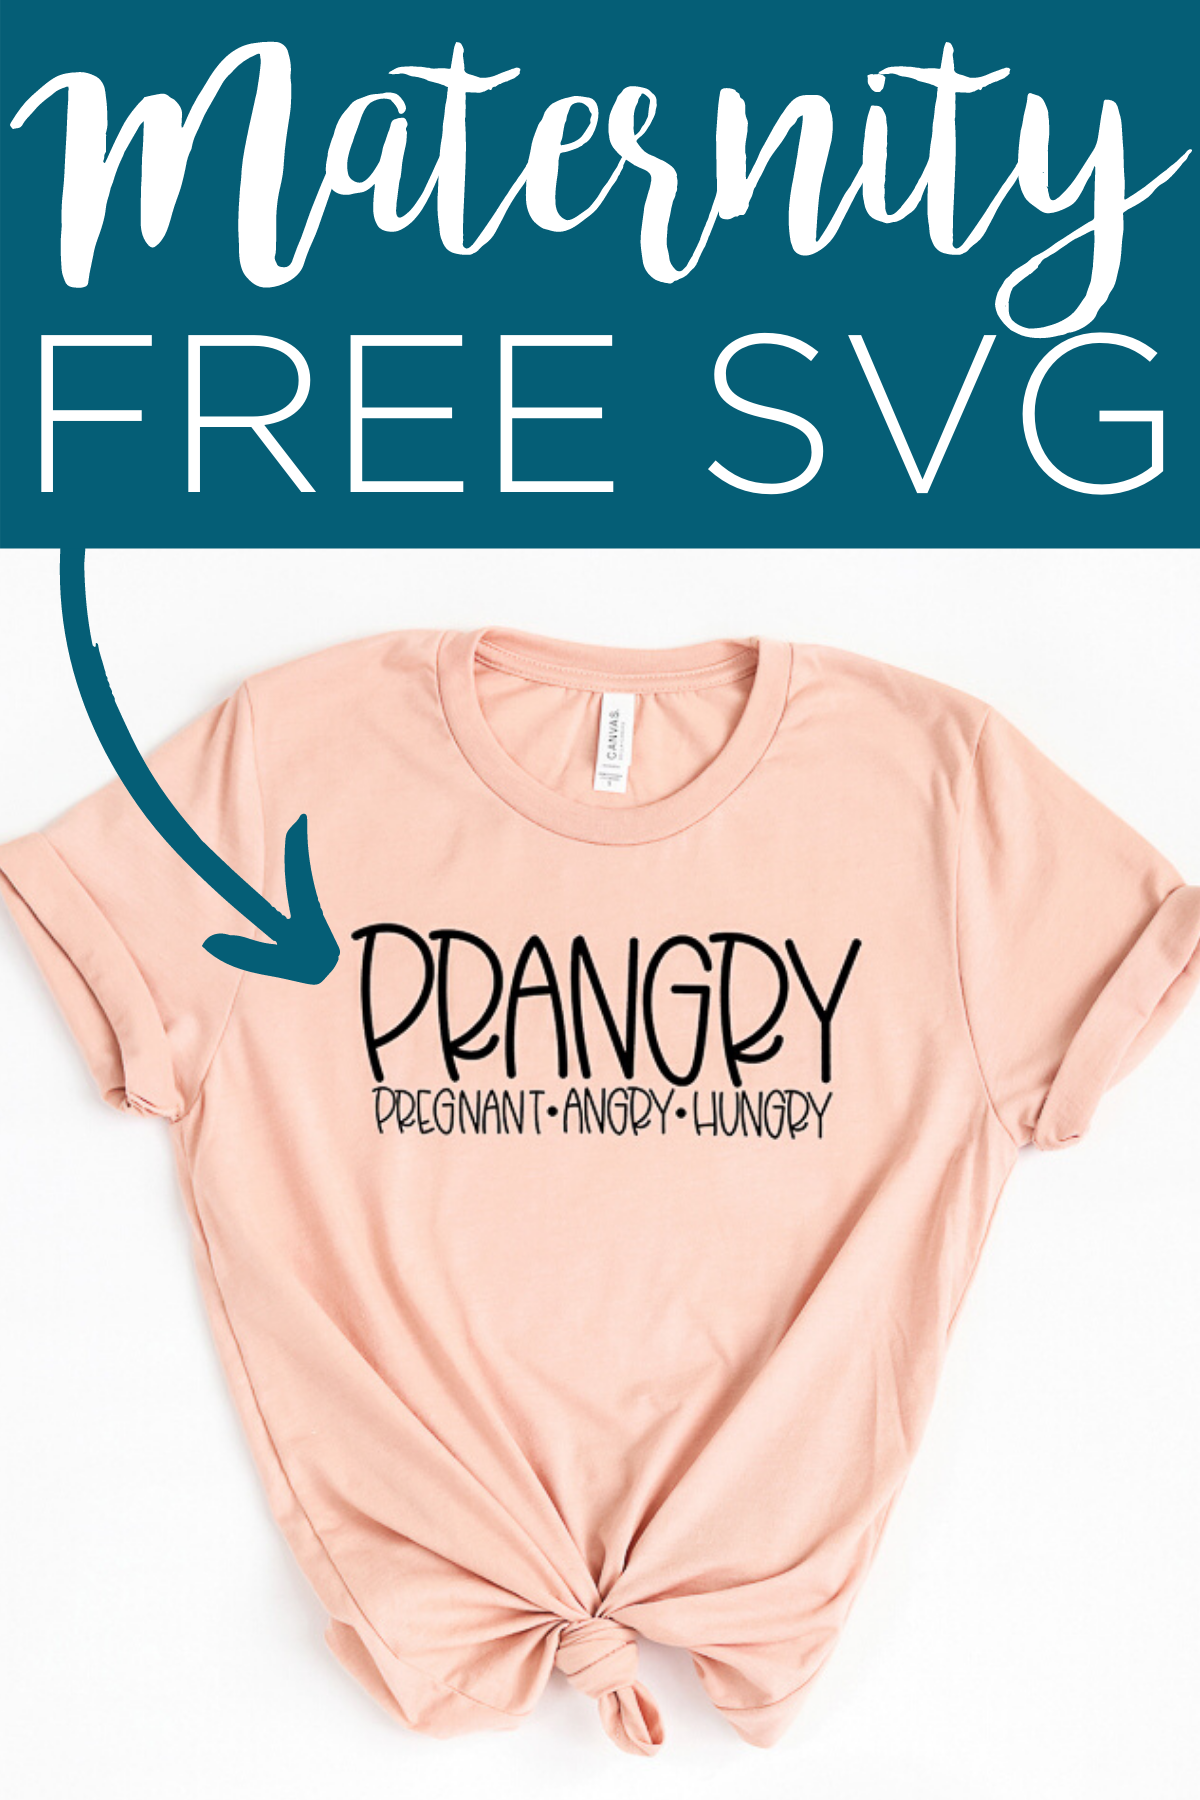 Get a funny pregnancy SVG for free then use it to make a cute maternity shirt! If you are "prangry", this is the perfect SVG for you plus there are more freebies perfect for babies and mom! #freesvg #svg #pregnancy #maternity #prangry #funny #cricut #cricutcreated